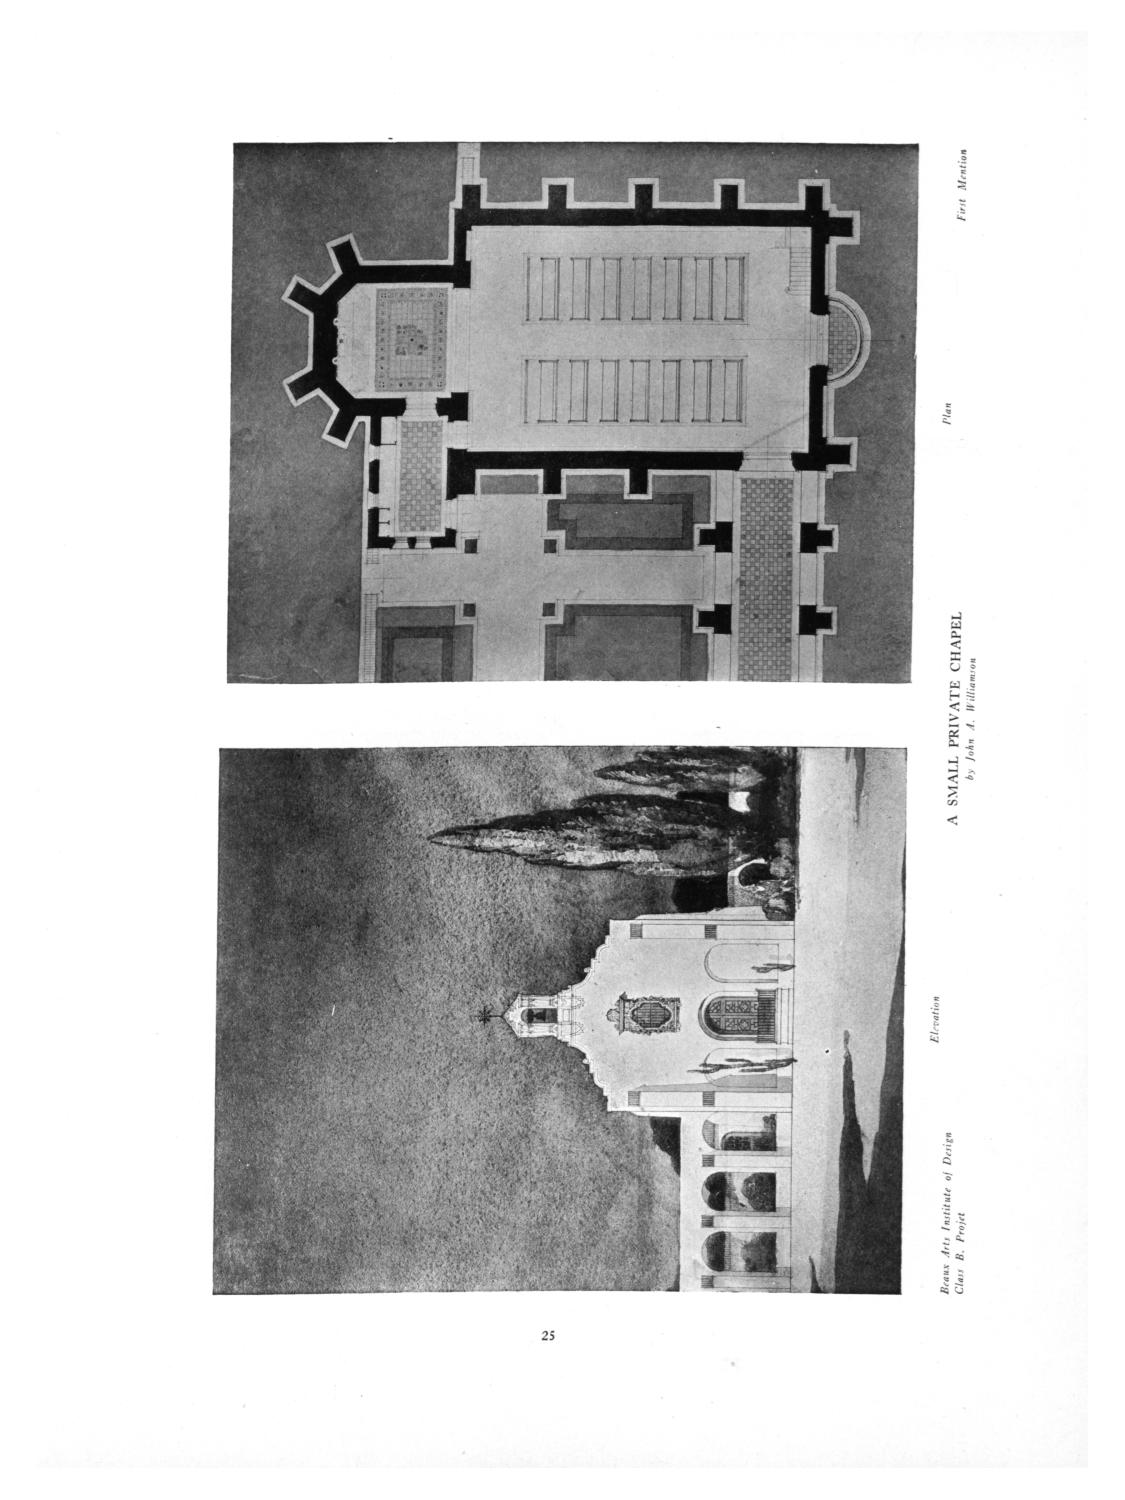 Year book of the Dallas Architectural Club and catalogue of its first annual exhibition : held at the Jefferson Hotel, Dallas, February eleventh to eighteenth, 1922
                                                
                                                    25
                                                